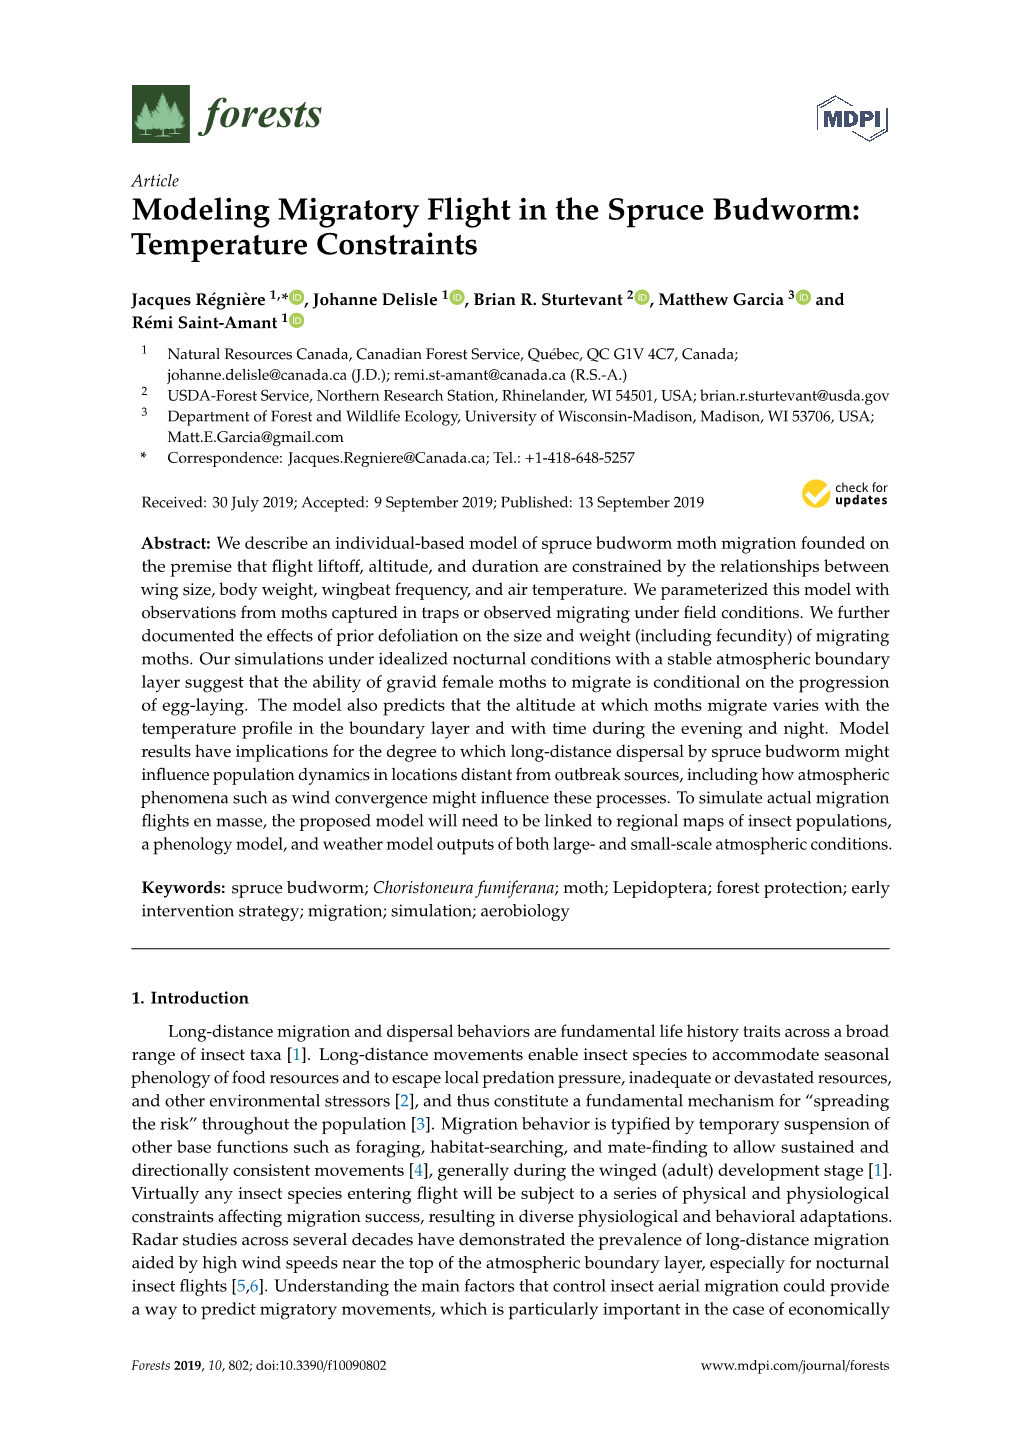 Modeling Migratory Flight in the Spruce Budworm: Temperature Constraints